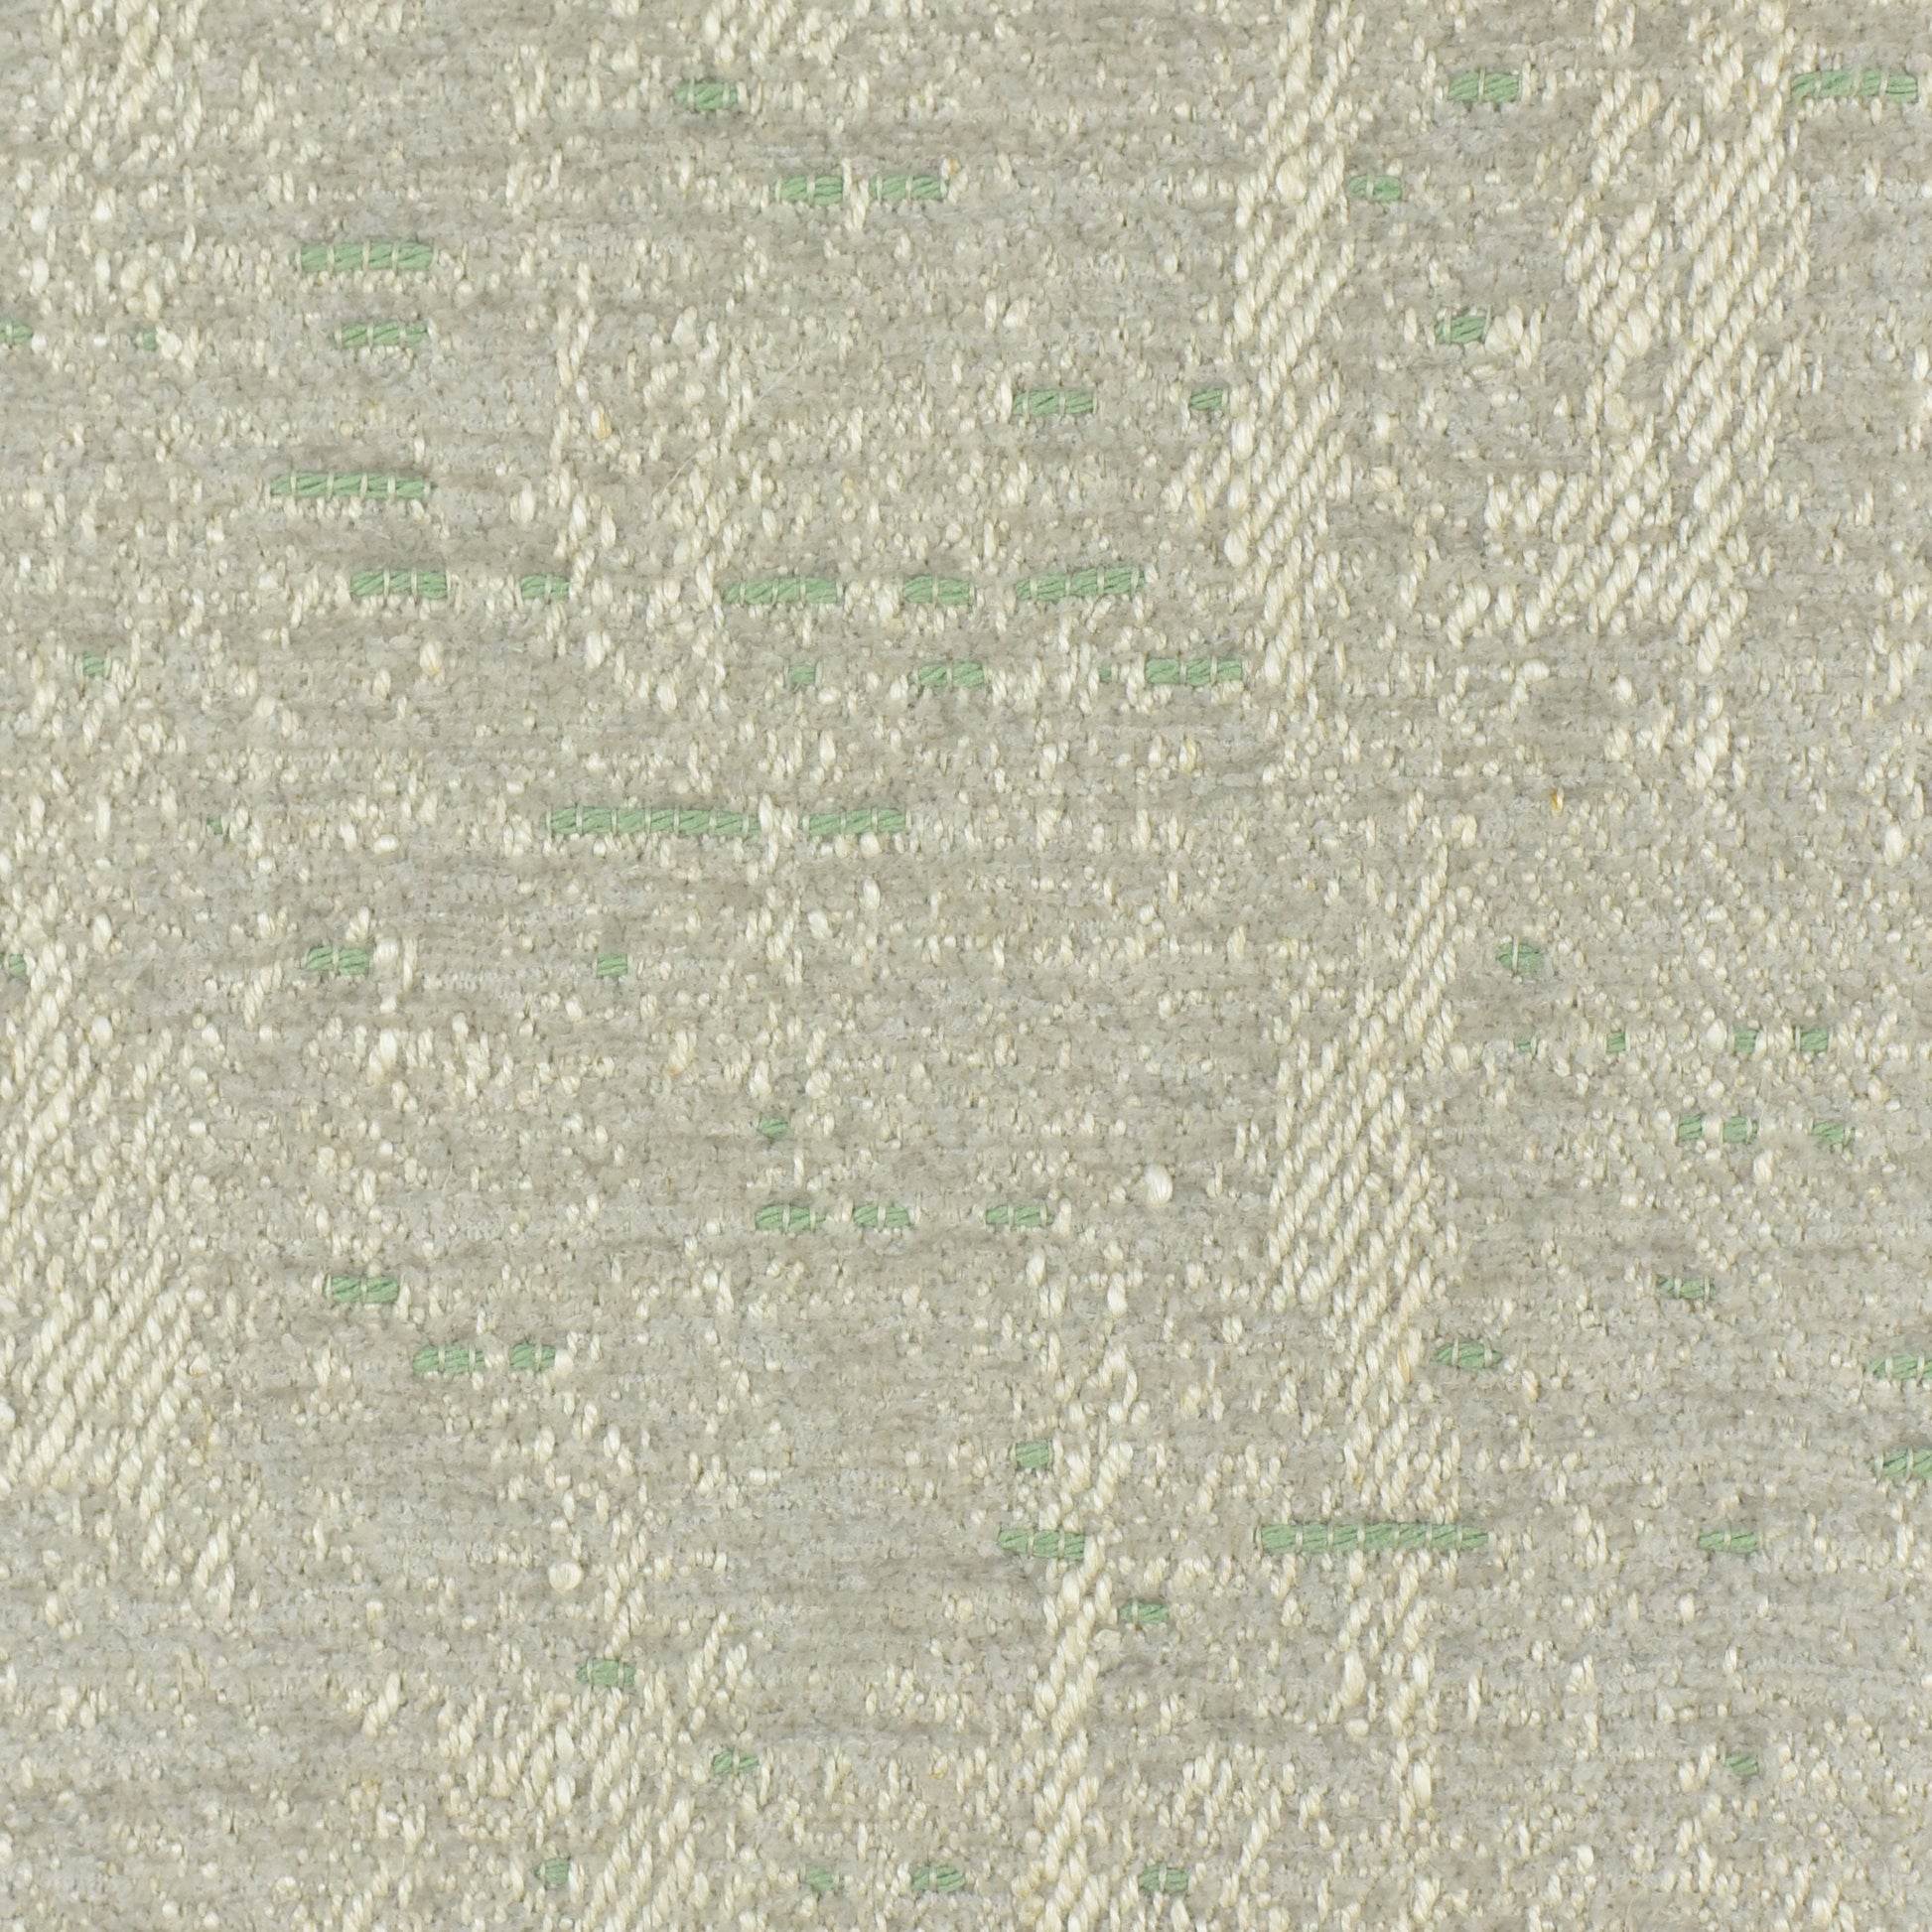 Modern Cotton Linen Blend Upholstery Fabric with Subtle Green Mixed in Cream Sand|Heavy Weight Fabric For Bench,Ottoman,Kitchen Chair Sofa